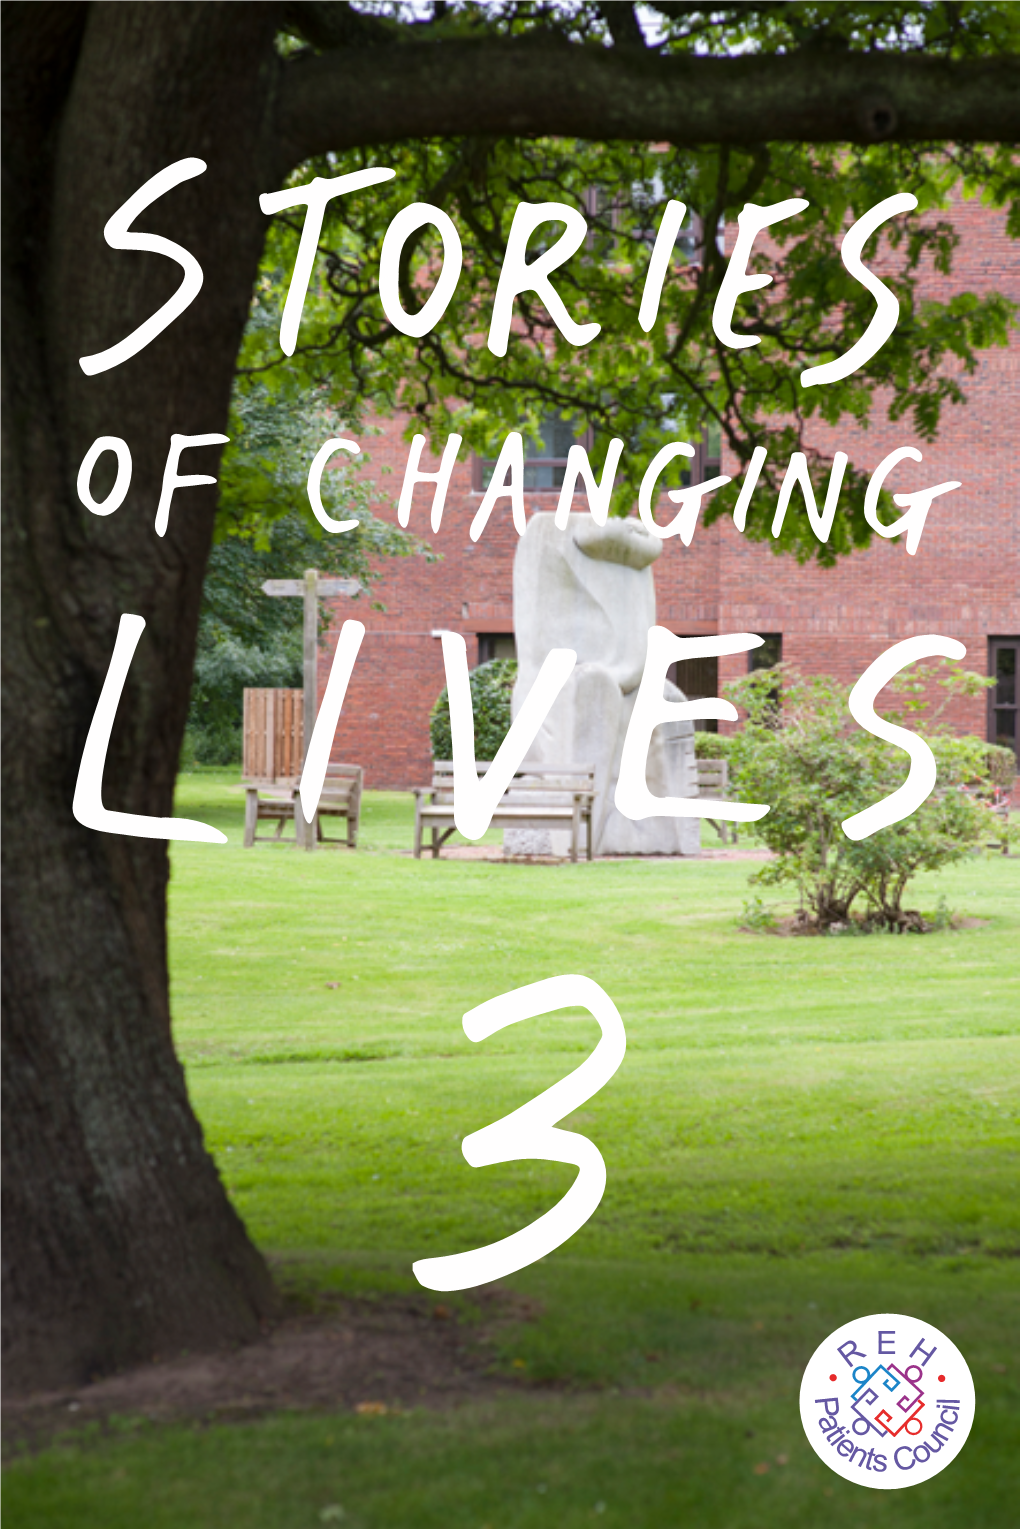 Stories of Changing Lives II in 2014 and Steering It Safely to Its Publication the Following Year